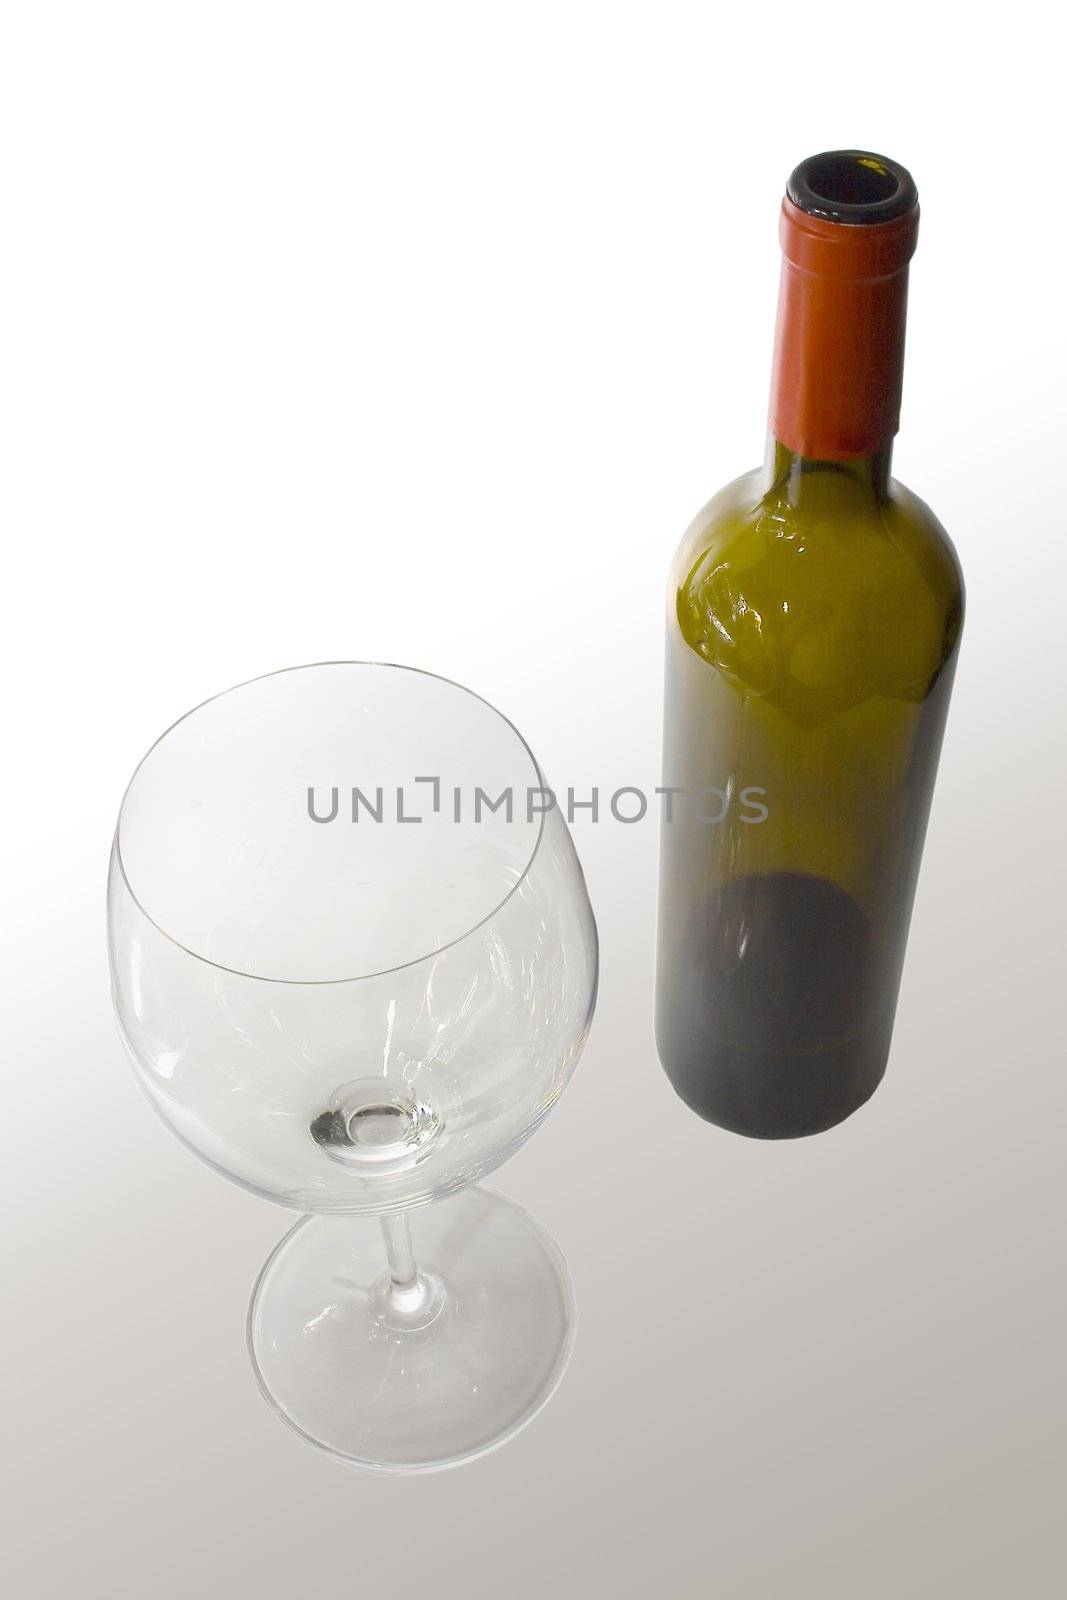 Bottle and glass cup of good wine